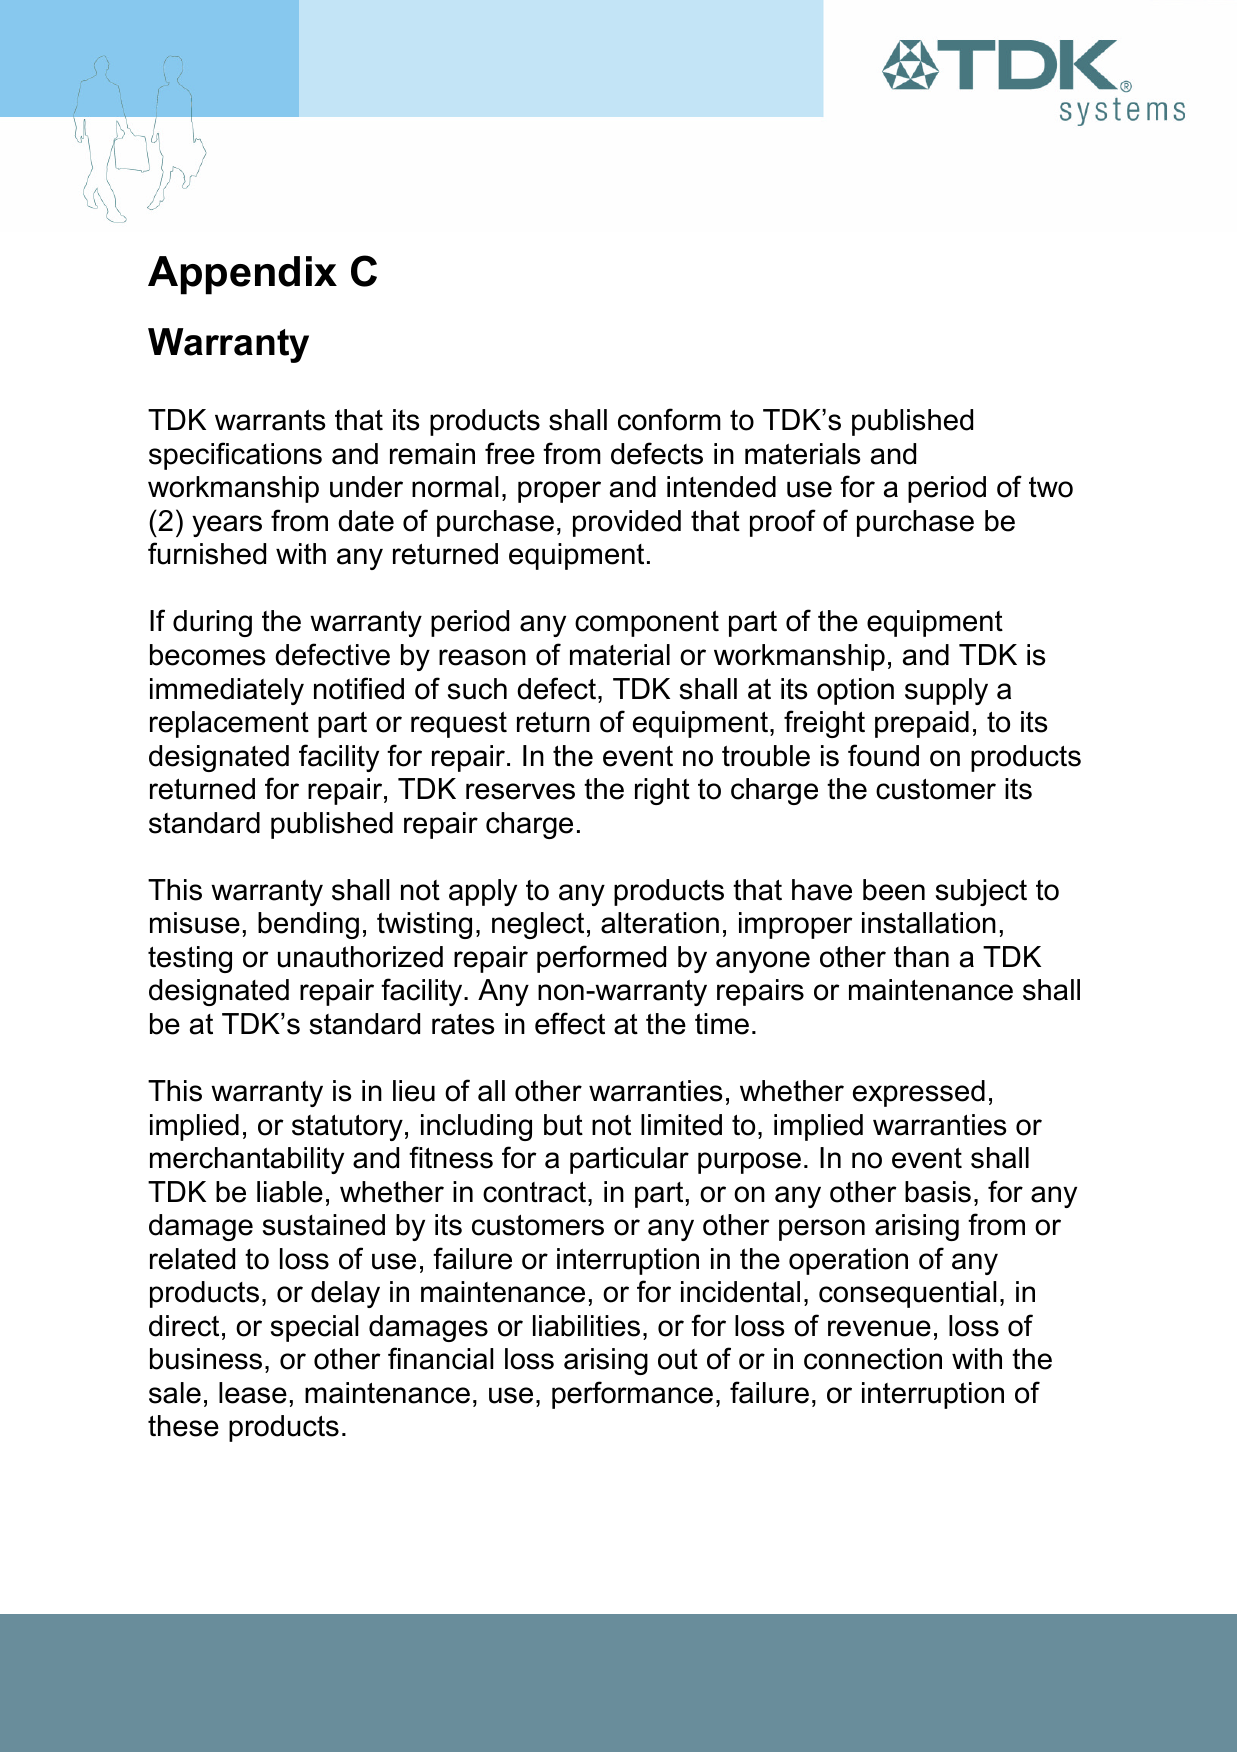 Appendix C Warranty  TDK warrants that its products shall conform to TDK’s published specifications and remain free from defects in materials and workmanship under normal, proper and intended use for a period of two (2) years from date of purchase, provided that proof of purchase be furnished with any returned equipment.  If during the warranty period any component part of the equipment becomes defective by reason of material or workmanship, and TDK is immediately notified of such defect, TDK shall at its option supply a replacement part or request return of equipment, freight prepaid, to its designated facility for repair. In the event no trouble is found on products returned for repair, TDK reserves the right to charge the customer its standard published repair charge.  This warranty shall not apply to any products that have been subject to misuse, bending, twisting, neglect, alteration, improper installation, testing or unauthorized repair performed by anyone other than a TDK designated repair facility. Any non-warranty repairs or maintenance shall be at TDK’s standard rates in effect at the time.  This warranty is in lieu of all other warranties, whether expressed, implied, or statutory, including but not limited to, implied warranties or merchantability and fitness for a particular purpose. In no event shall TDK be liable, whether in contract, in part, or on any other basis, for any damage sustained by its customers or any other person arising from or related to loss of use, failure or interruption in the operation of any products, or delay in maintenance, or for incidental, consequential, in direct, or special damages or liabilities, or for loss of revenue, loss of business, or other financial loss arising out of or in connection with the sale, lease, maintenance, use, performance, failure, or interruption of these products. 